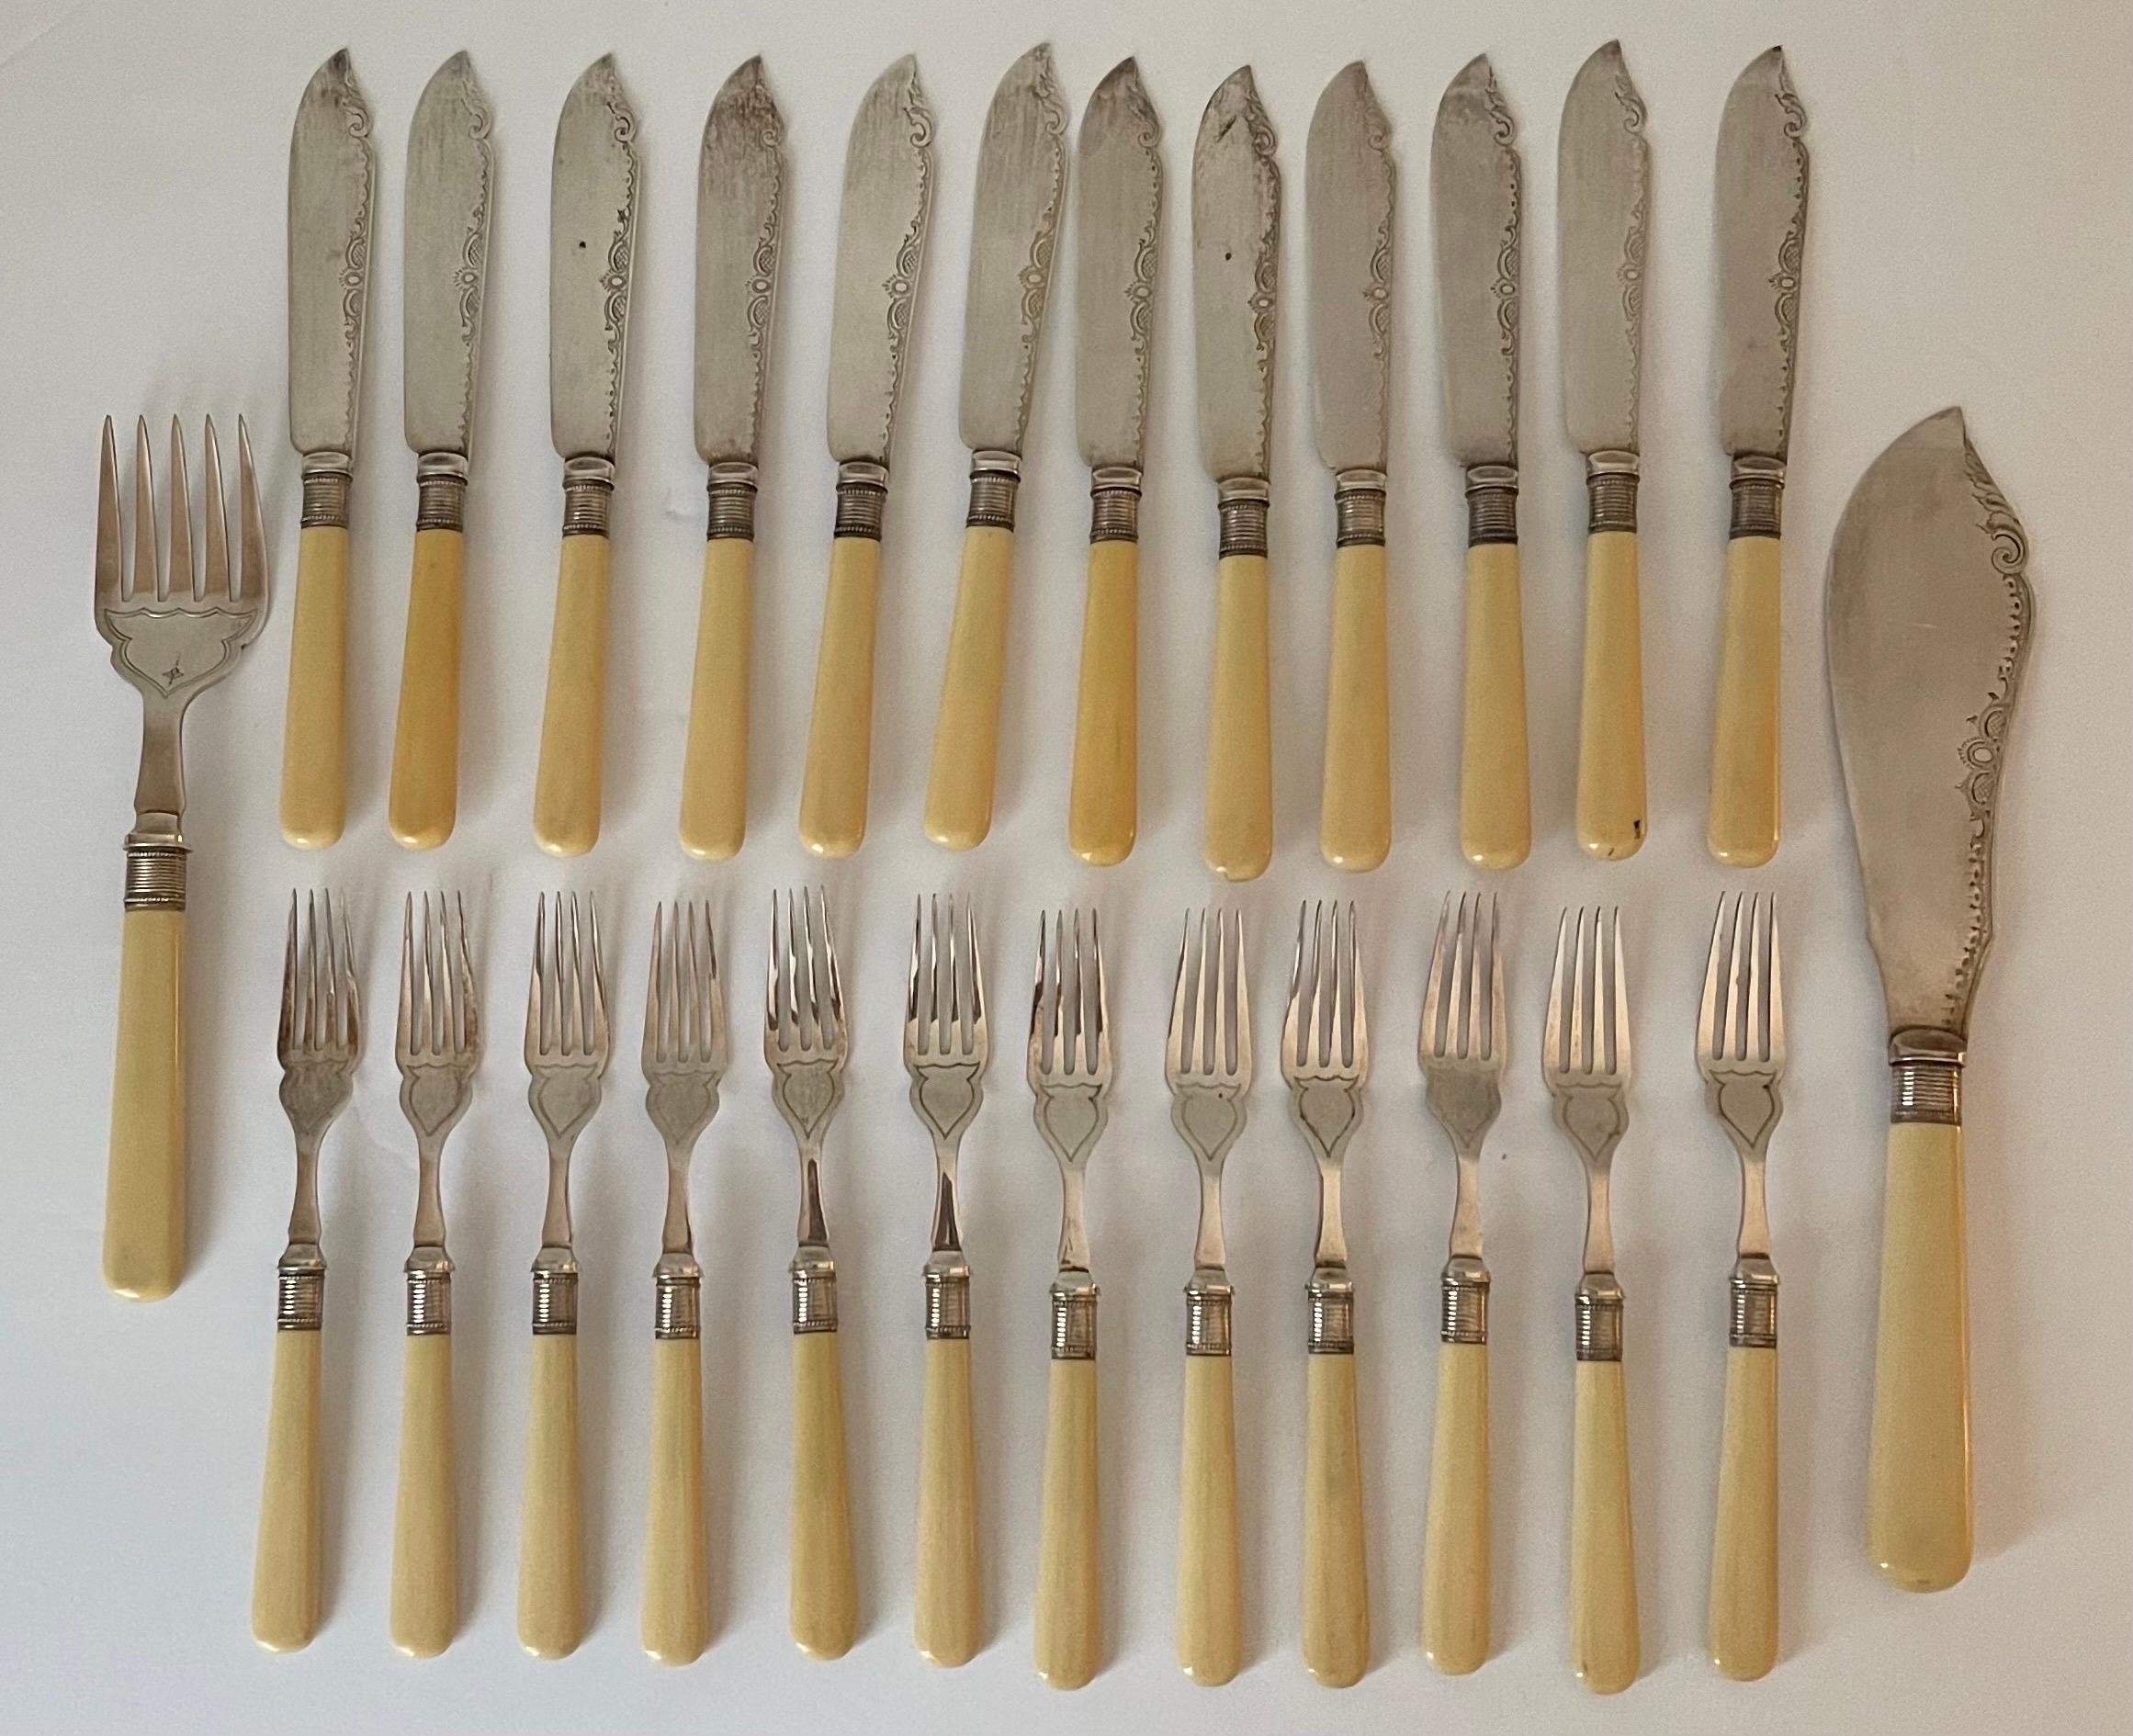 12-Place Fish Service by Hamilton-Laidlaw, Glasgow Circa 1877-1878. Sterling with simulated bone handles. Unoriginal storage bags are included. 
12 Fish forks each measure: 7” tall x 0.75” wide 
12 Fish knives each measure: 8” tall x 1” wide 
1